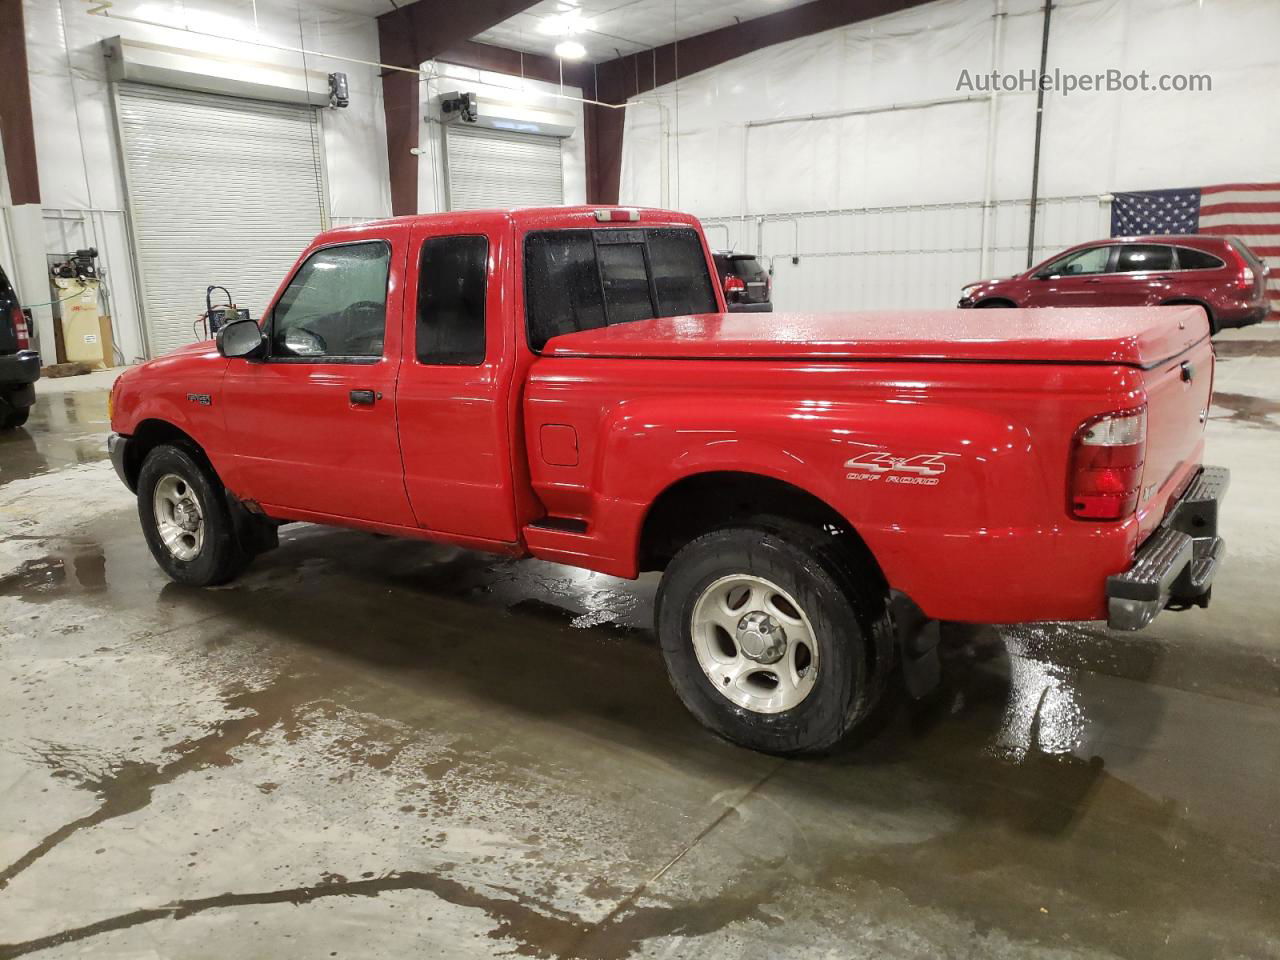 2001 Ford Ranger Super Cab Red vin: 1FTZR15E31PA93807